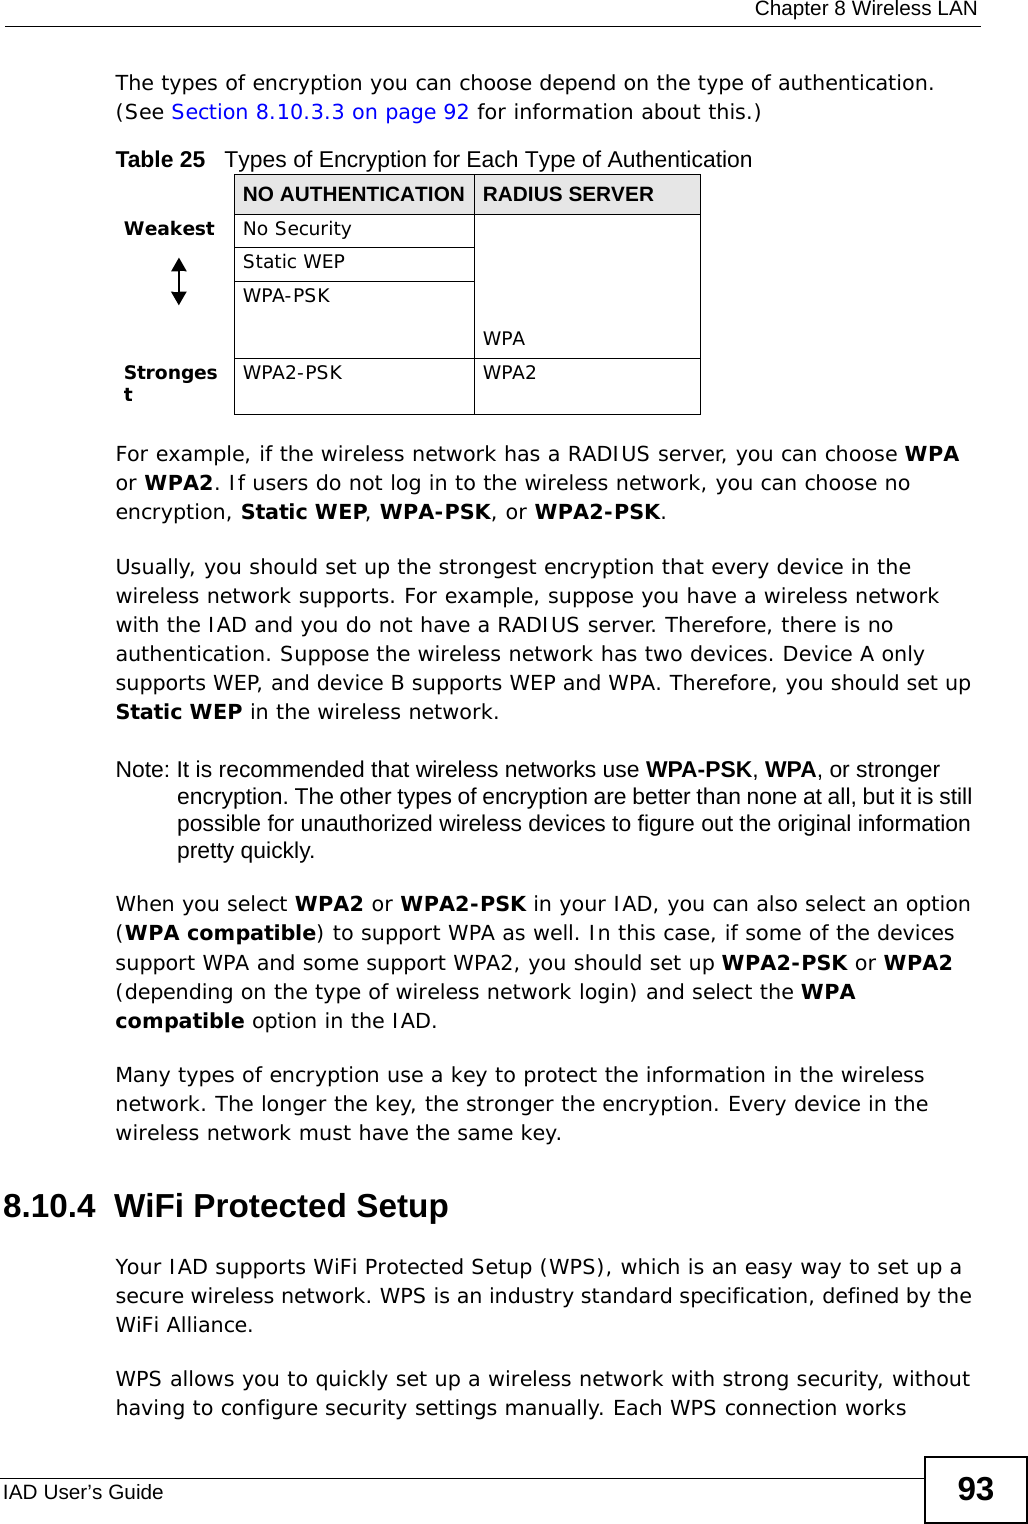  Chapter 8 Wireless LANIAD User’s Guide 93The types of encryption you can choose depend on the type of authentication. (See Section 8.10.3.3 on page 92 for information about this.)For example, if the wireless network has a RADIUS server, you can choose WPA or WPA2. If users do not log in to the wireless network, you can choose no encryption, Static WEP, WPA-PSK, or WPA2-PSK.Usually, you should set up the strongest encryption that every device in the wireless network supports. For example, suppose you have a wireless network with the IAD and you do not have a RADIUS server. Therefore, there is no authentication. Suppose the wireless network has two devices. Device A only supports WEP, and device B supports WEP and WPA. Therefore, you should set up Static WEP in the wireless network.Note: It is recommended that wireless networks use WPA-PSK, WPA, or stronger encryption. The other types of encryption are better than none at all, but it is still possible for unauthorized wireless devices to figure out the original information pretty quickly.When you select WPA2 or WPA2-PSK in your IAD, you can also select an option (WPA compatible) to support WPA as well. In this case, if some of the devices support WPA and some support WPA2, you should set up WPA2-PSK or WPA2 (depending on the type of wireless network login) and select the WPA compatible option in the IAD.Many types of encryption use a key to protect the information in the wireless network. The longer the key, the stronger the encryption. Every device in the wireless network must have the same key.8.10.4  WiFi Protected SetupYour IAD supports WiFi Protected Setup (WPS), which is an easy way to set up a secure wireless network. WPS is an industry standard specification, defined by the WiFi Alliance.WPS allows you to quickly set up a wireless network with strong security, without having to configure security settings manually. Each WPS connection works Table 25   Types of Encryption for Each Type of AuthenticationNO AUTHENTICATION RADIUS SERVERWeakest No SecurityWPAStatic WEPWPA-PSKStrongestWPA2-PSK WPA2